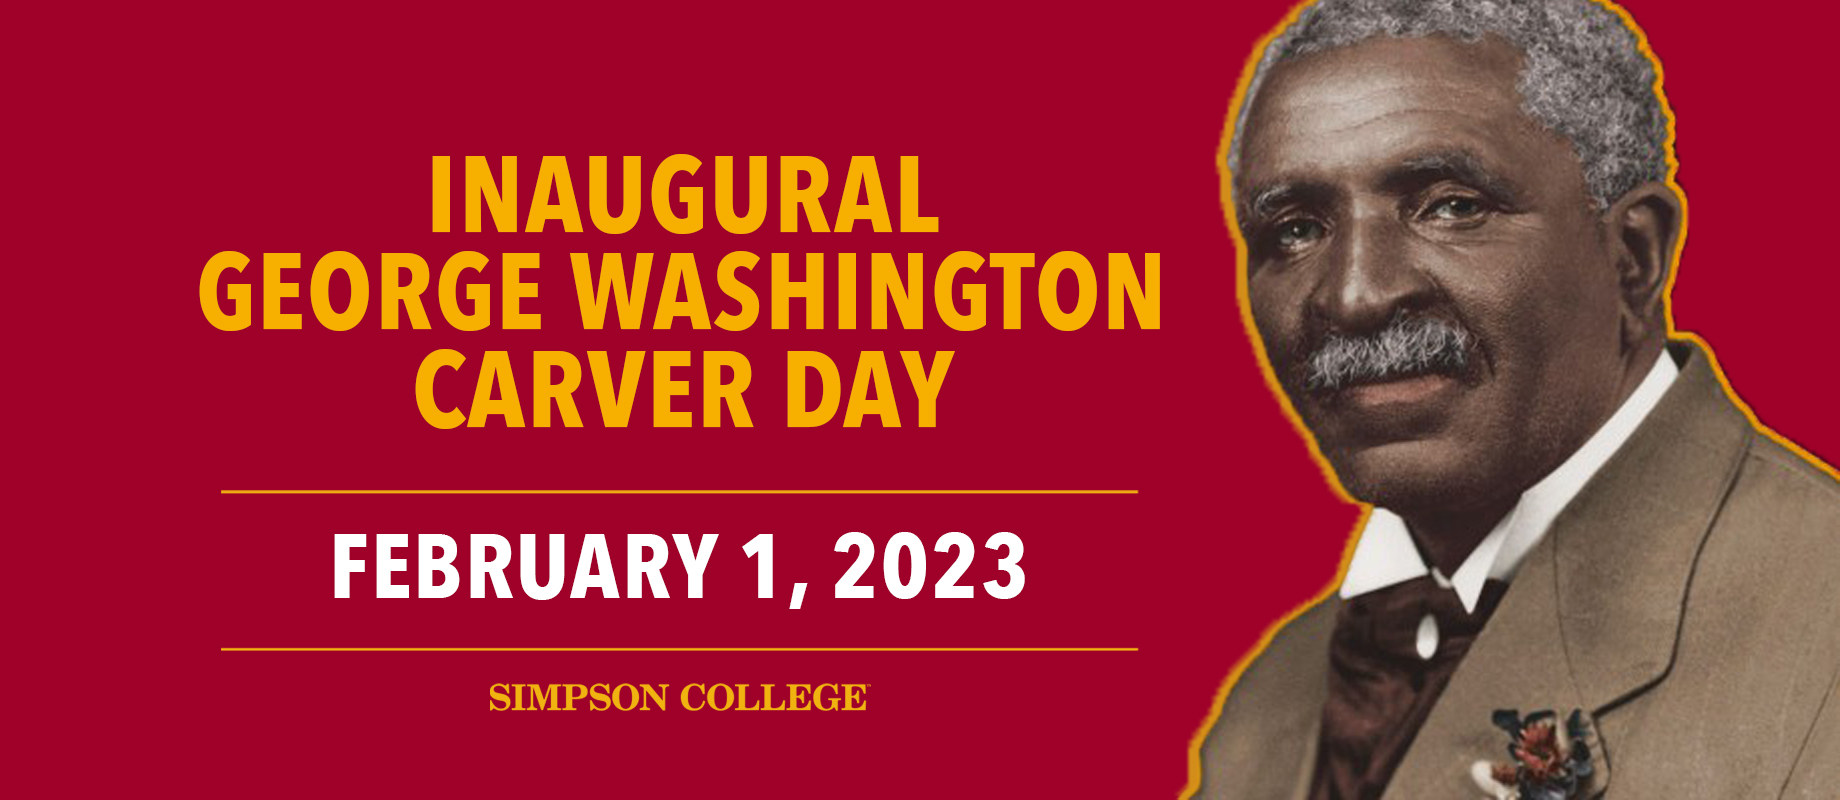 Simpson College to Join Indianola in Celebrating George Washington Carver Day